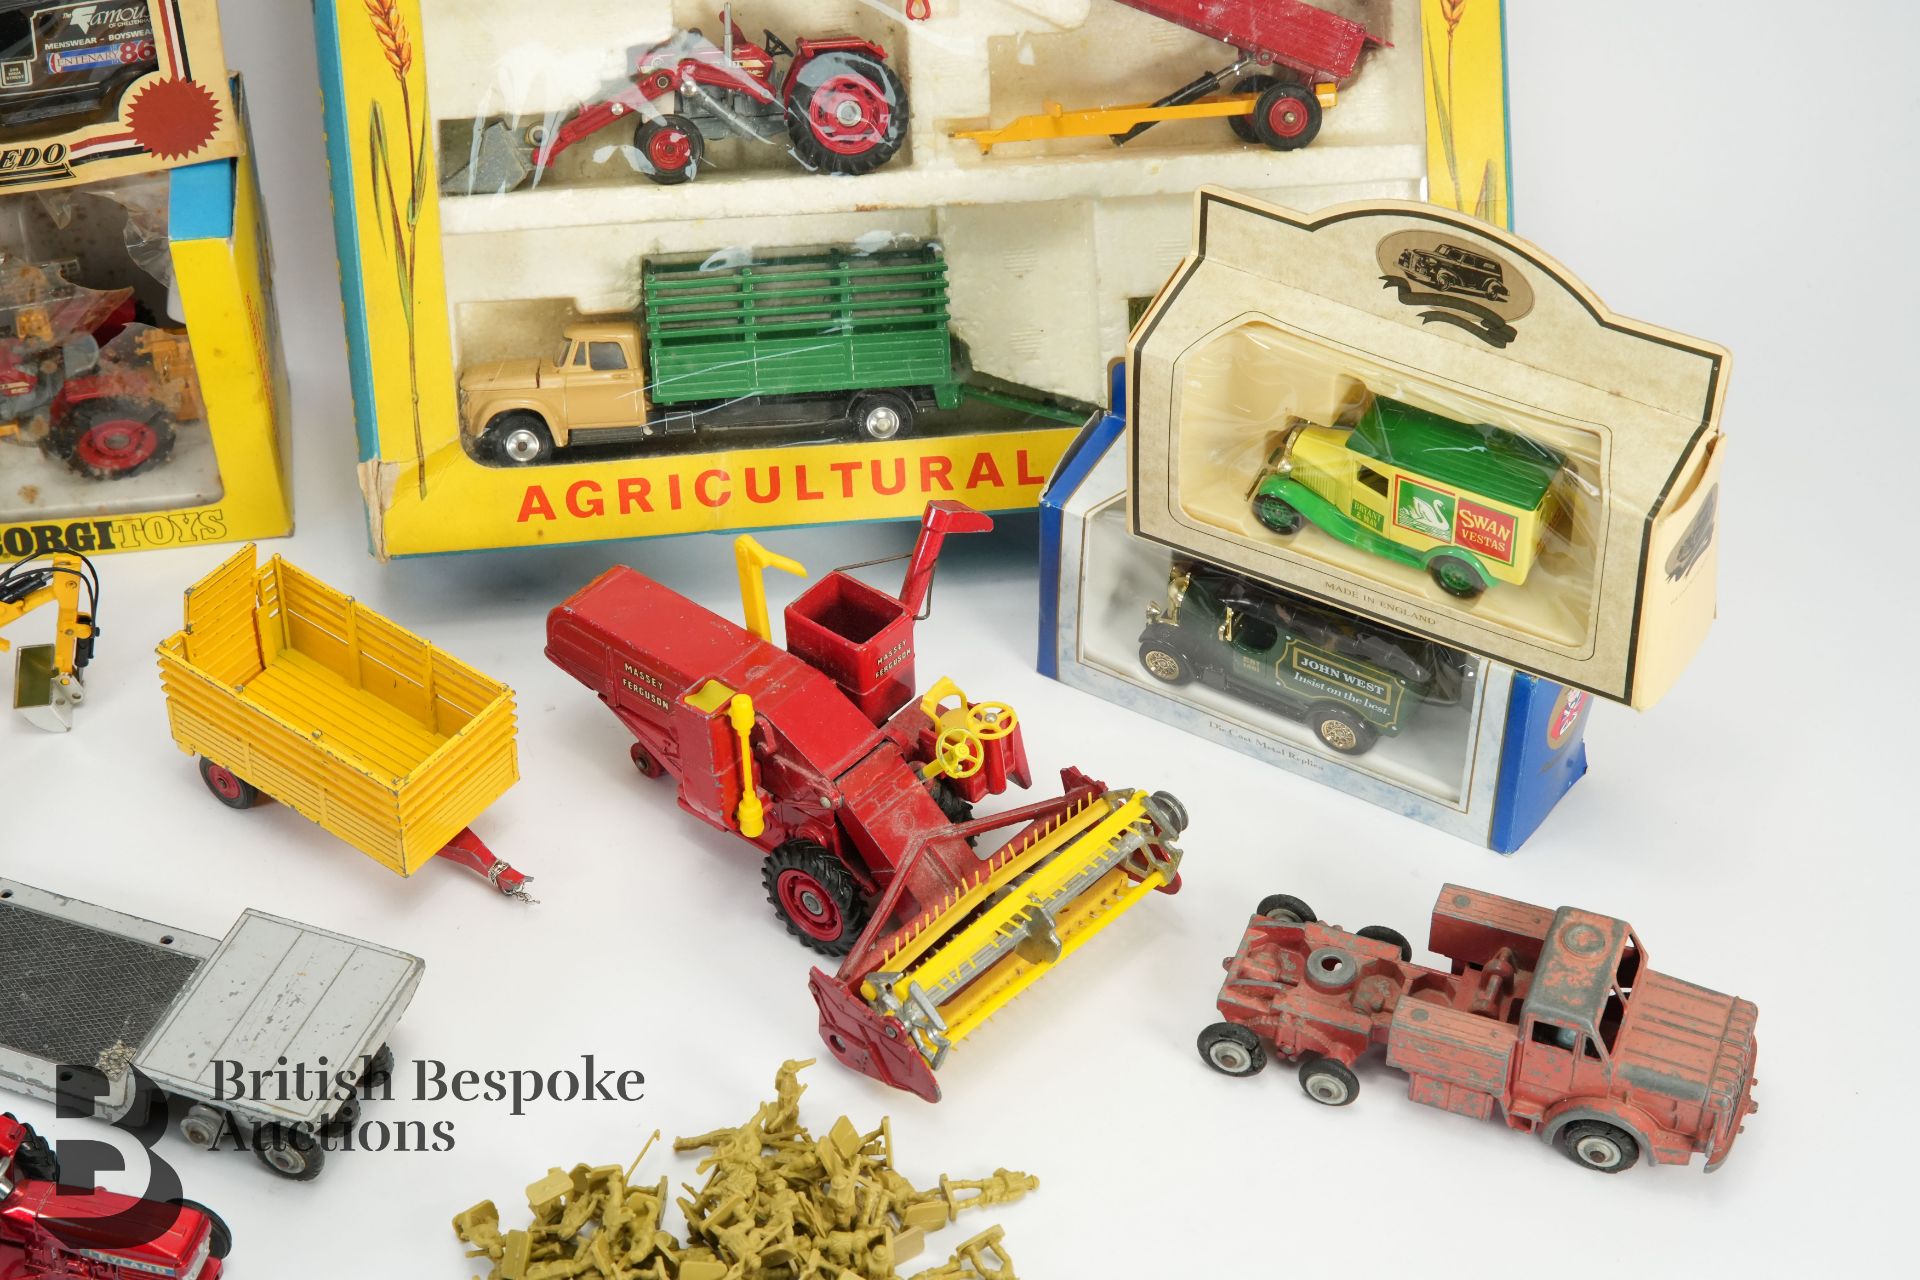 Dinky and Corgi Toys incl. Agricultural Gift Set No. 5 - Image 4 of 6